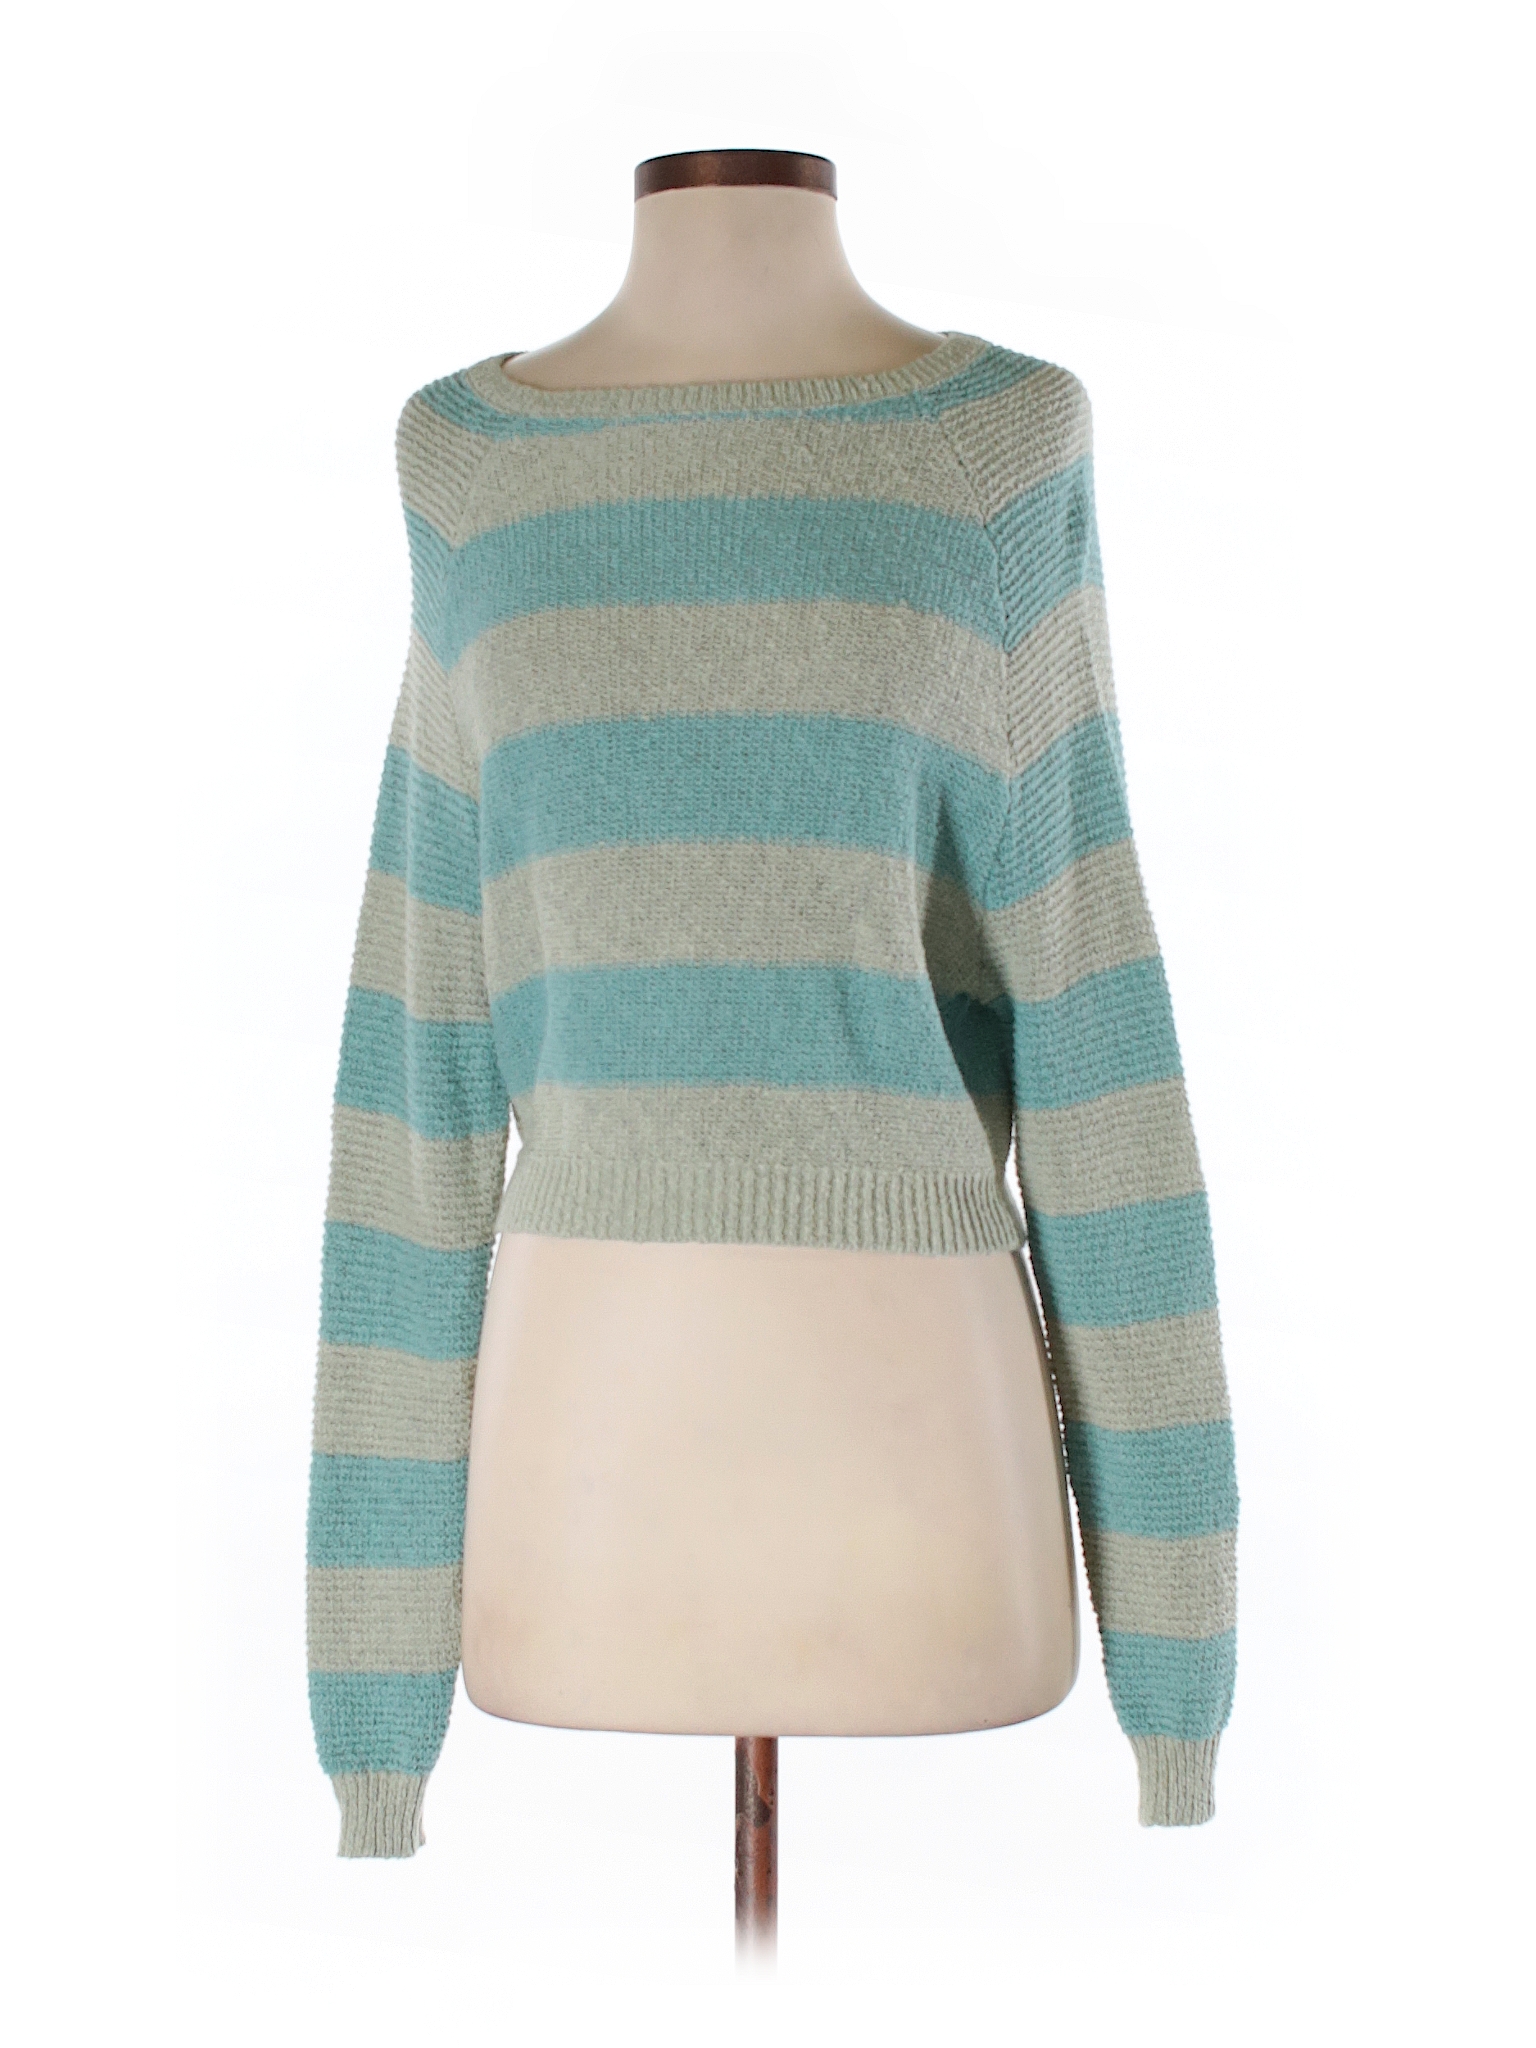 Cooperative Stripes Teal Pullover Sweater Size XS - 85% off | thredUP